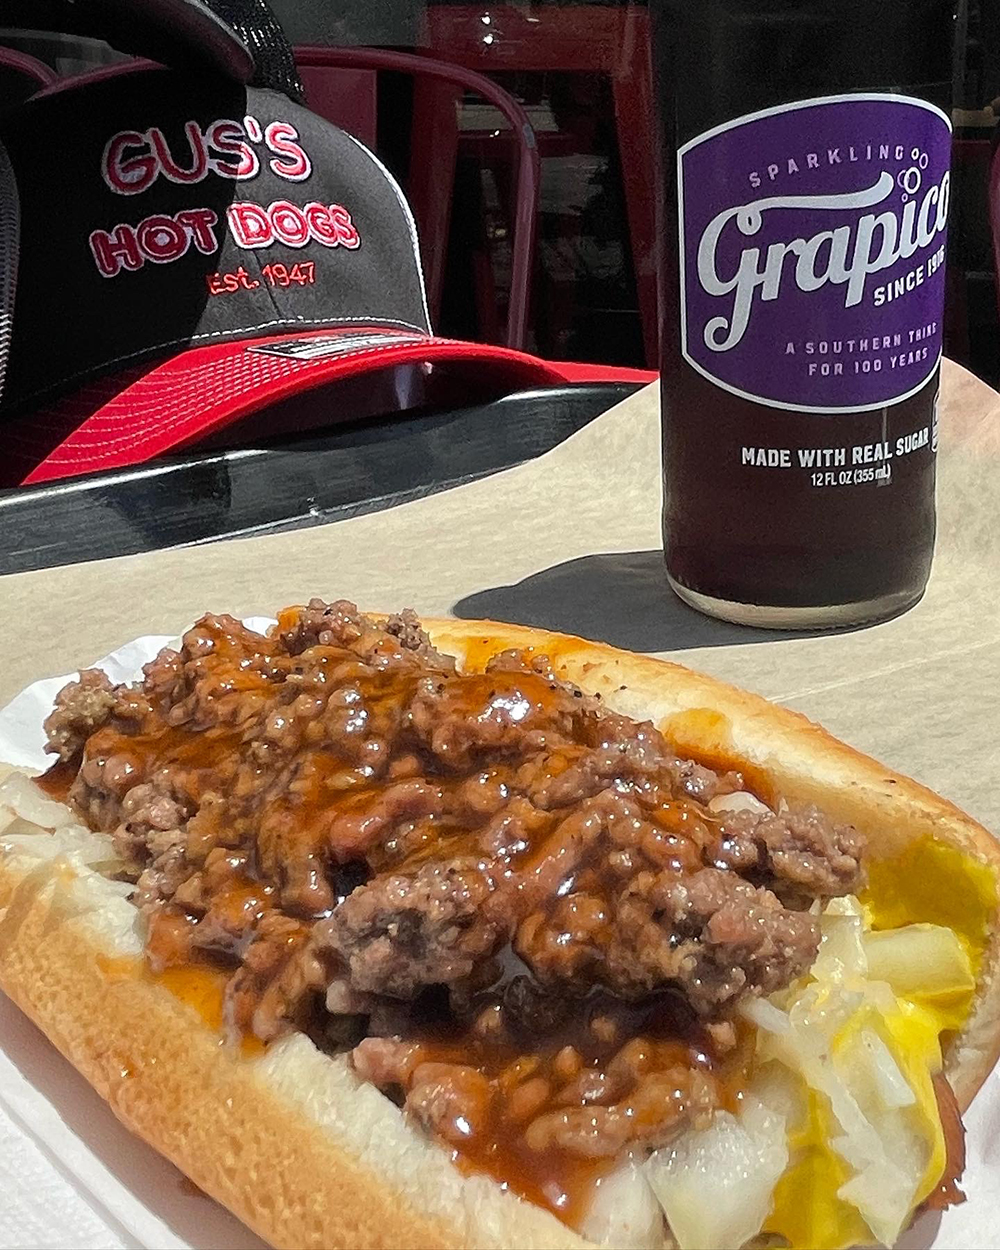 https://www.hot-dog.org/sites/default/files/images/Special%20Dog%20with%20Grapico%20and%20Hat%20w1000.jpg